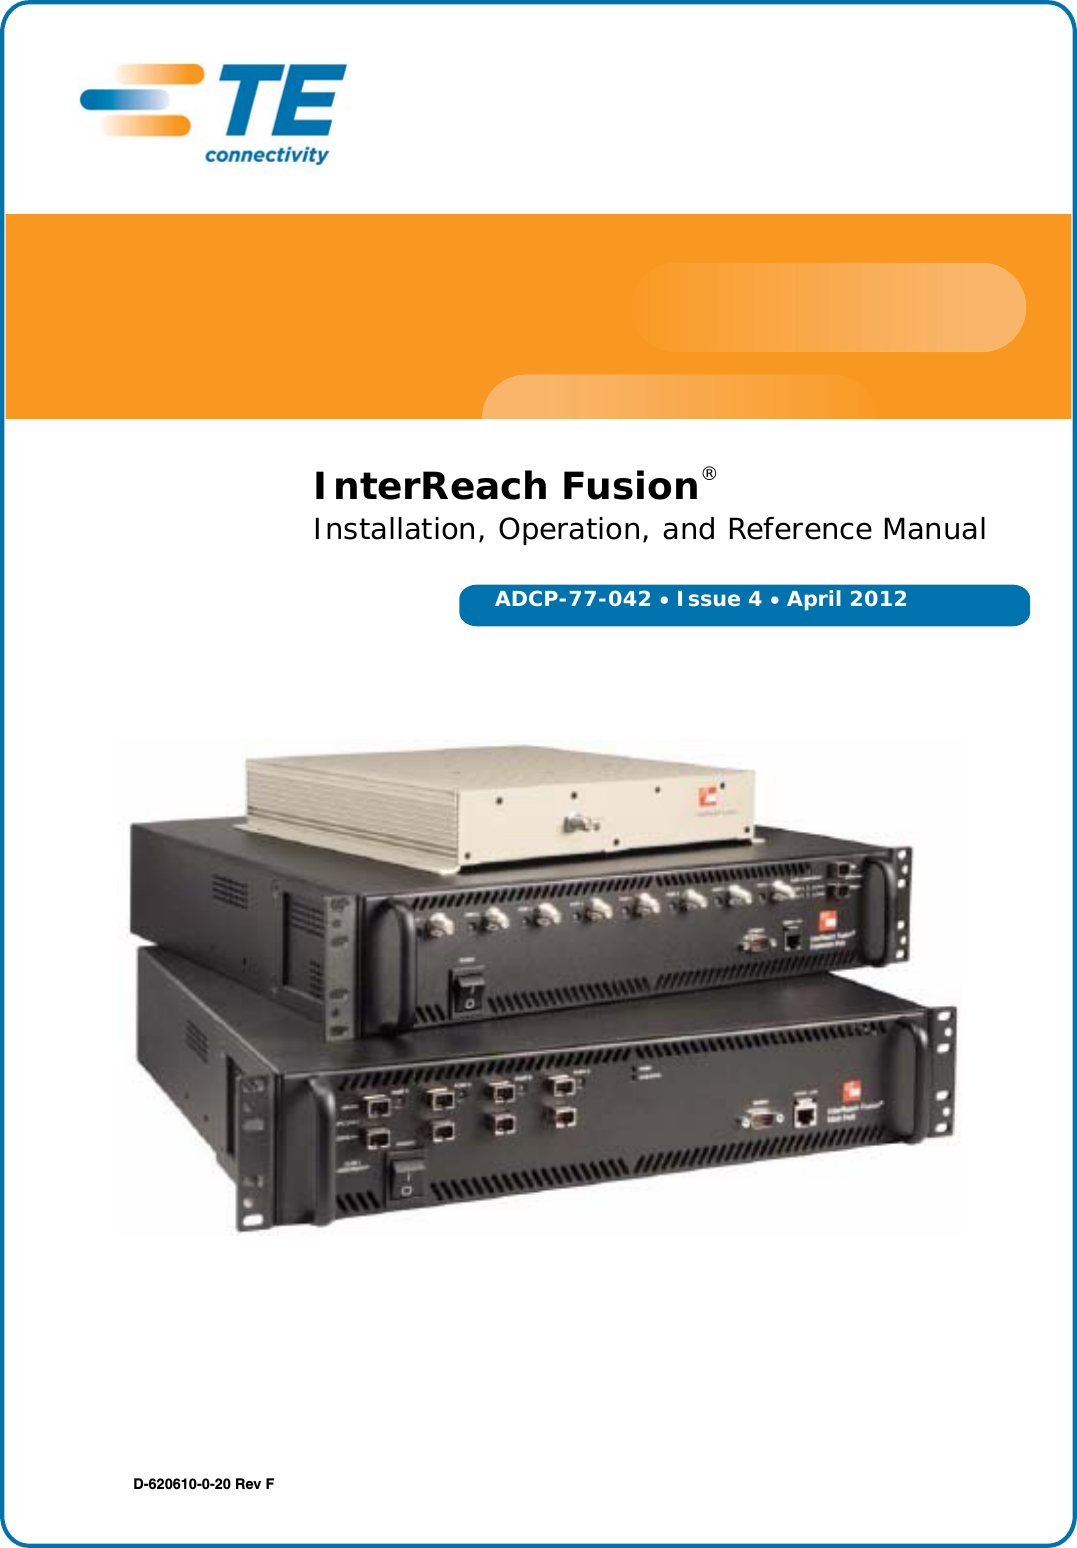 ADCP-77-042  Issue 4  April 2012D-620616-0-20 Rev FInterReach Fusion® WidebandInstallation, Operation, and Reference ManualD-620610-0-20 Rev F